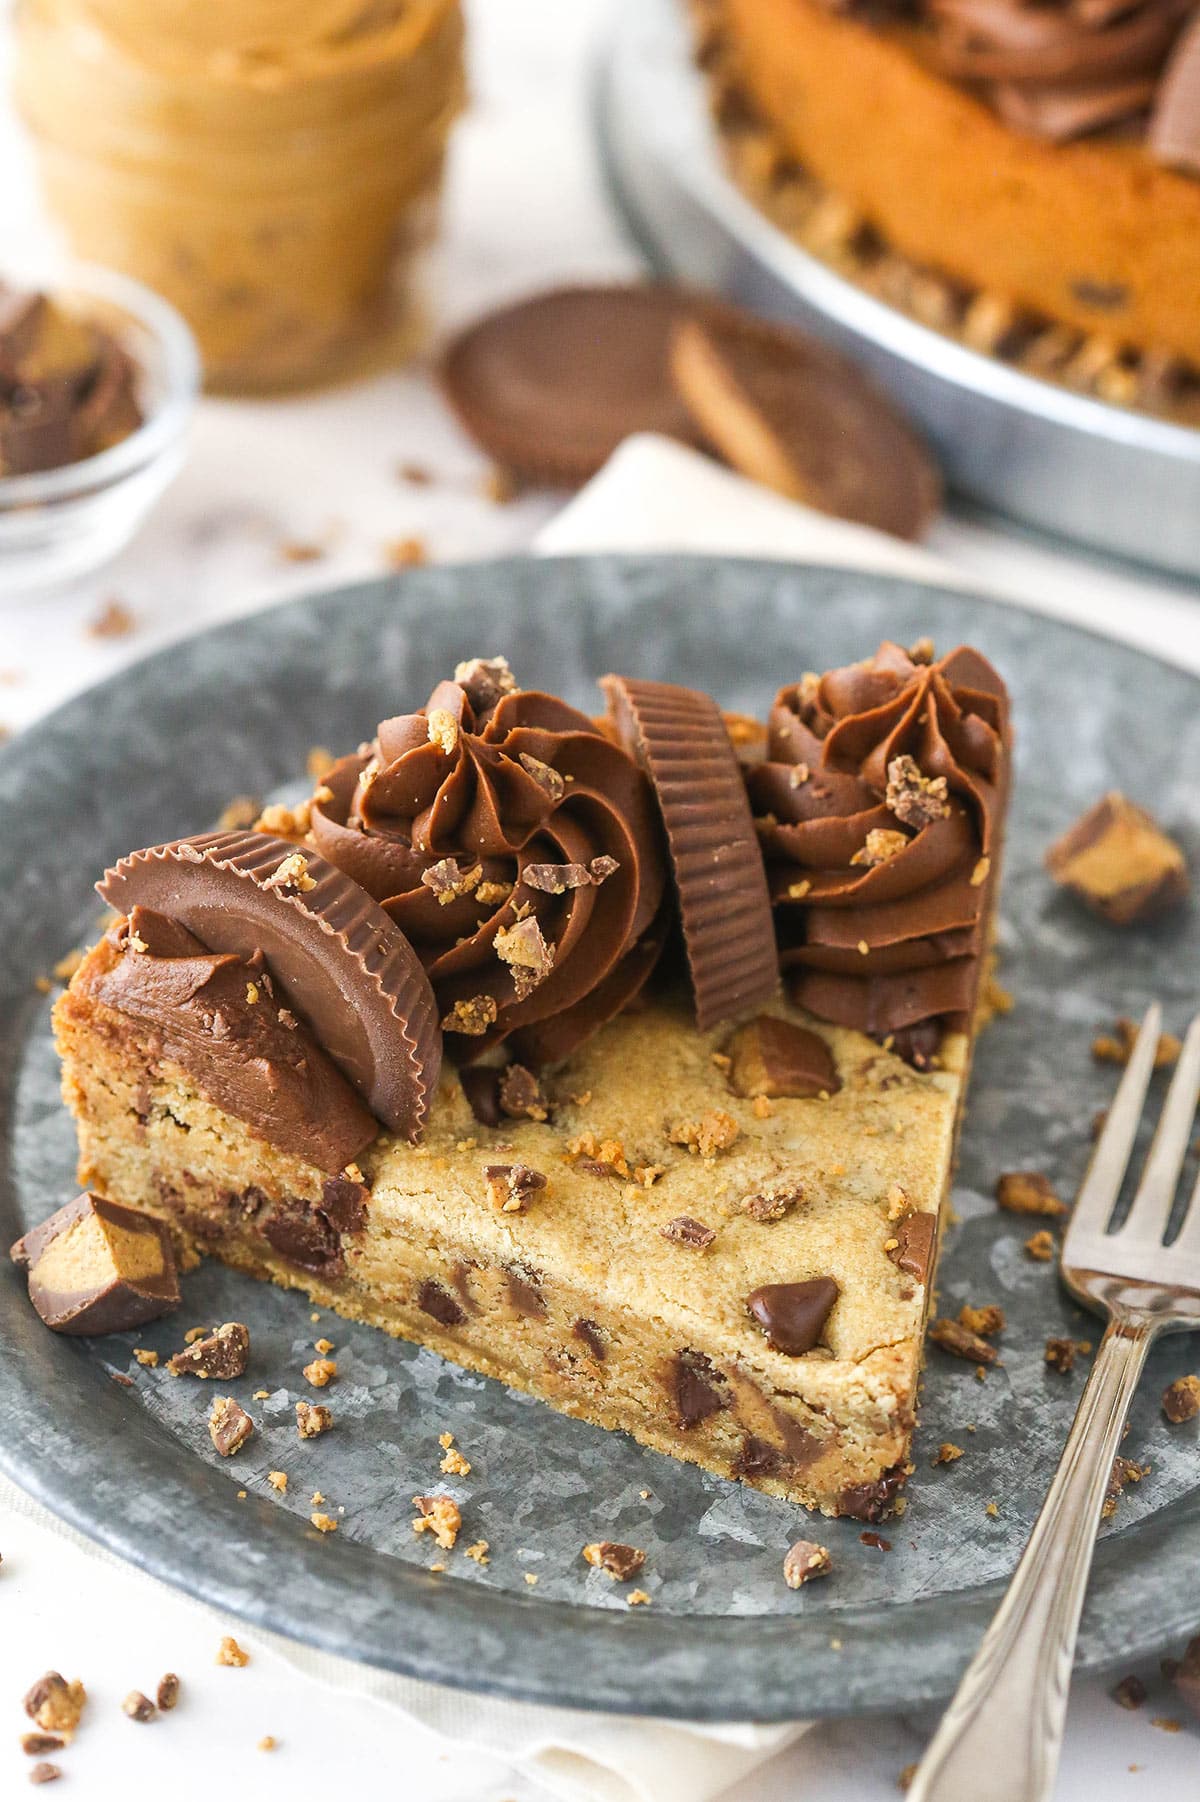 A slice of Reese's peanut butter cookie cake on a plate with a fork.